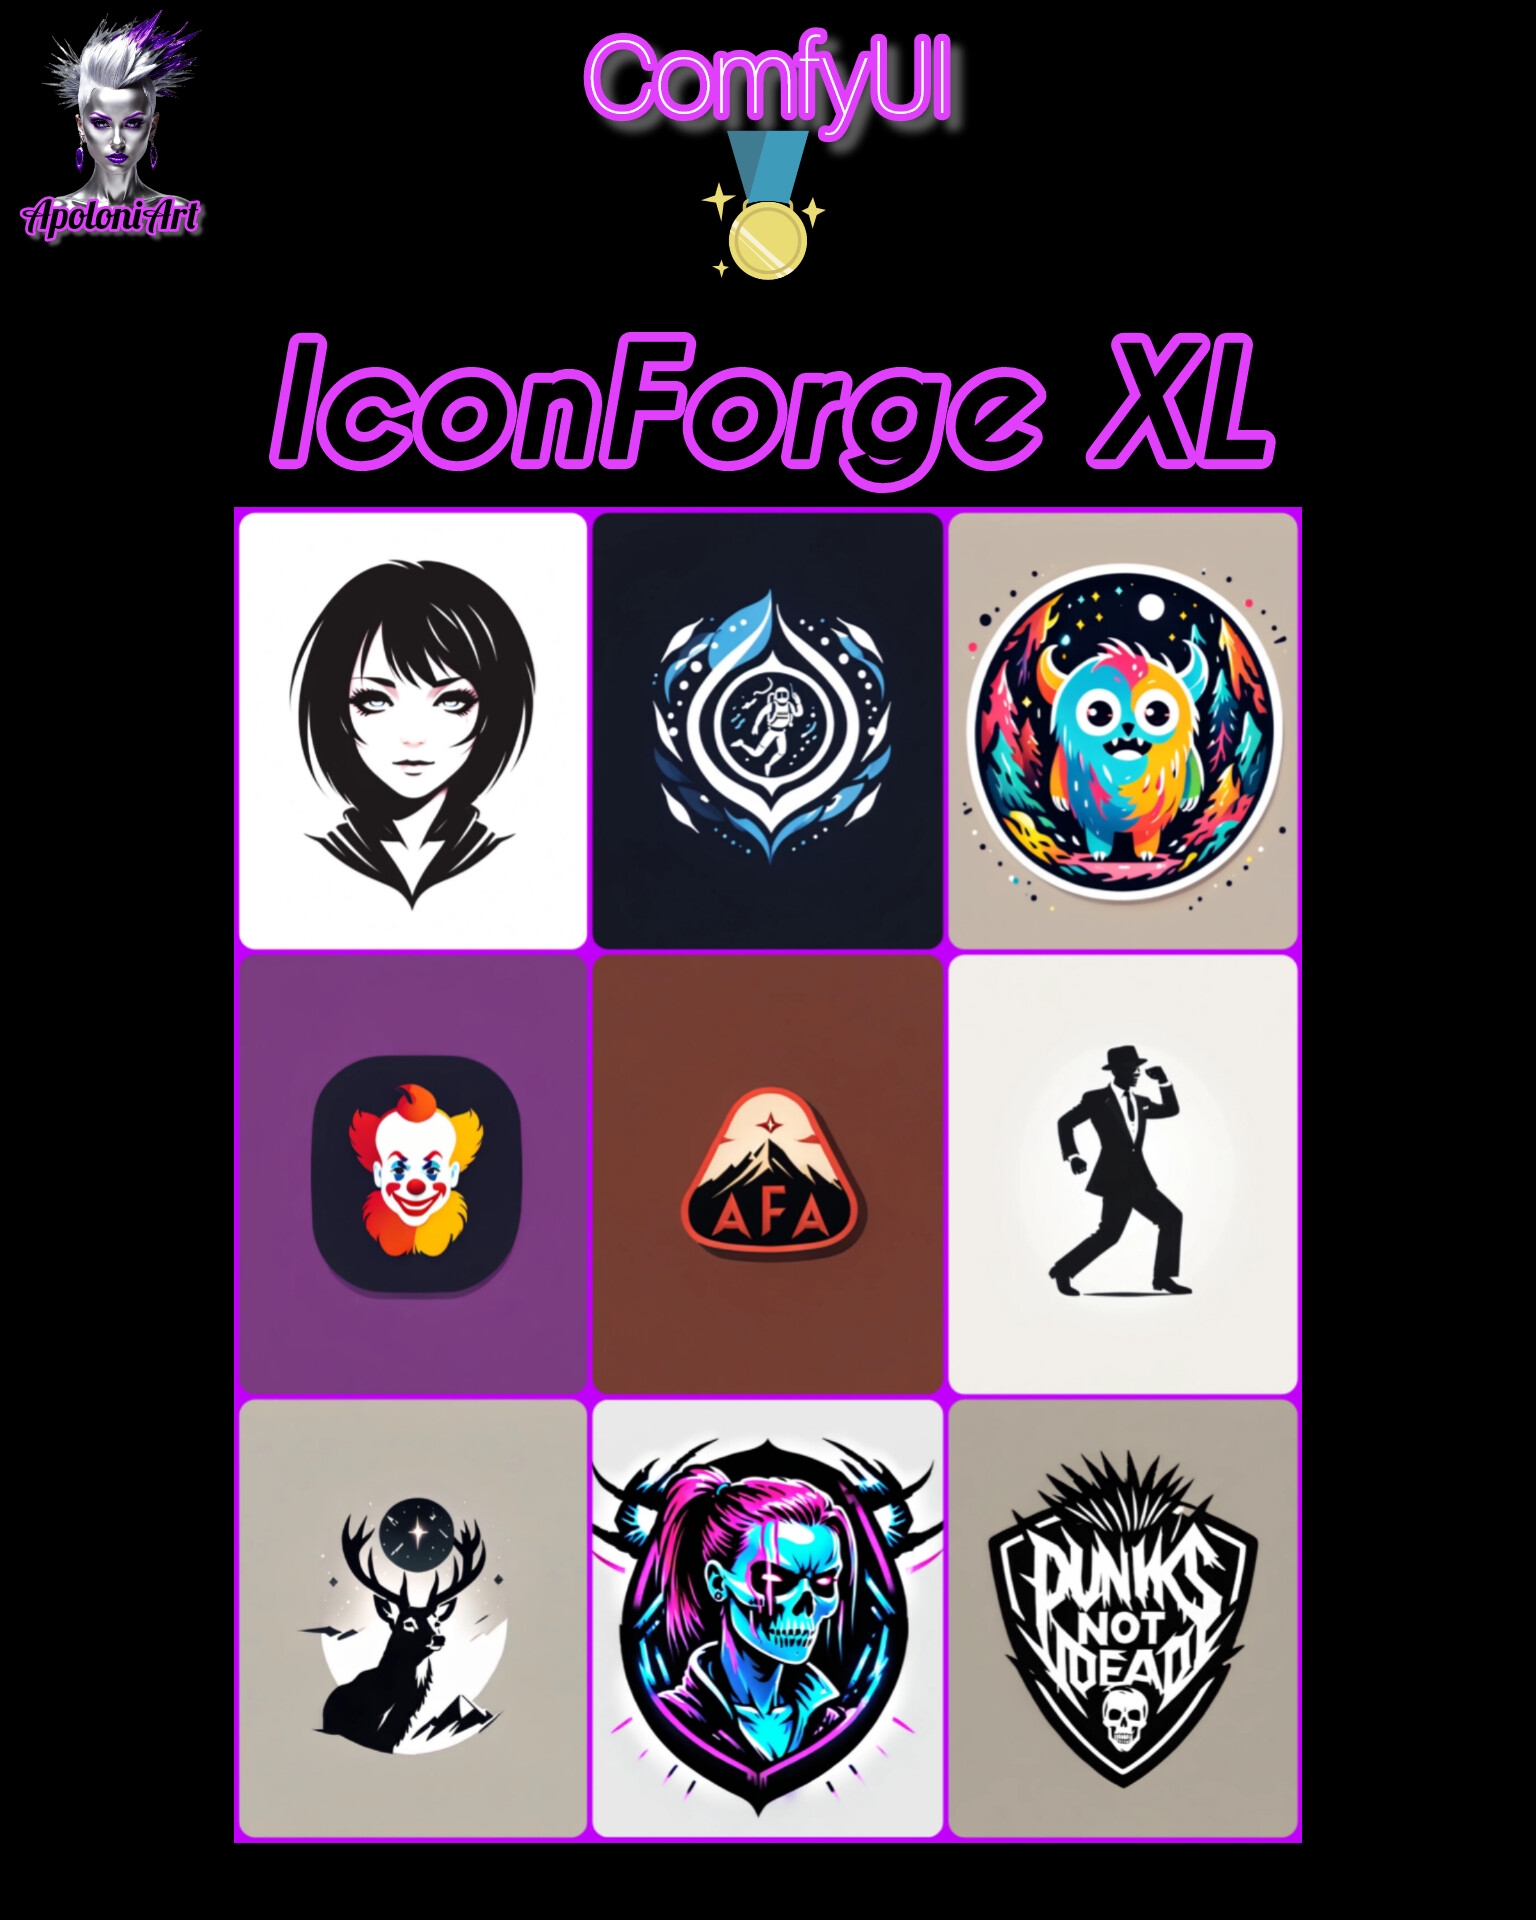 🎨IconForge XL🌠<br>Cool app for creating your desired logos & avatars.... simple, to the point & descriptive is best when it comes to prompting, 500 word essay prompts are a complete nonsense.<br>Just plug in your required size, number of images, and press play. All the rest is taken care of!<br>🌟Cost 6-10 credits per Image🌟<br><br>Have fun, share your cool creations, and don't forget to give me a 5*💖 rating<br><br>Love & Digital Kisses<br>Apolonia💋<br><br>👉Please check out my other fun, unique ComfyUI tools:<br><br>SoulMerger XL: https://www.seaart.ai/workFlowAppDetail/co62pp5e878c73d8659g<br>AniVamp: <br>https://www.seaart.ai/workFlowAppDetail/co8m24le878c738g5q90<br>CaricatureSelf XL: https://www.seaart.ai/workFlowAppDetail/co6q9u5e878c73dmii5g <br>MixM4aster: <br>https://www.seaart.ai/workFlowAppDetail/co9vch5e878c73b2c700<br>Teleporter XL (beta testing): https://www.seaart.ai/workFlowAppDetail/co82c1le878c73einke0<br><br>🌟⚠ LEGAL ⚠🌟<br>*** You are solely responsible and liable for the content you generate when using my 'IconForge XL' ComfyUI tool***<br><br>This resource can reproduce the likeness of a real person. Out of respect for those individuals, and in accordance with the SeaArt Content Rules, only work-safe images and non-commercial use is permitted.<br><br>DON'T BE A TOOL..... RESPECT THE RULES!